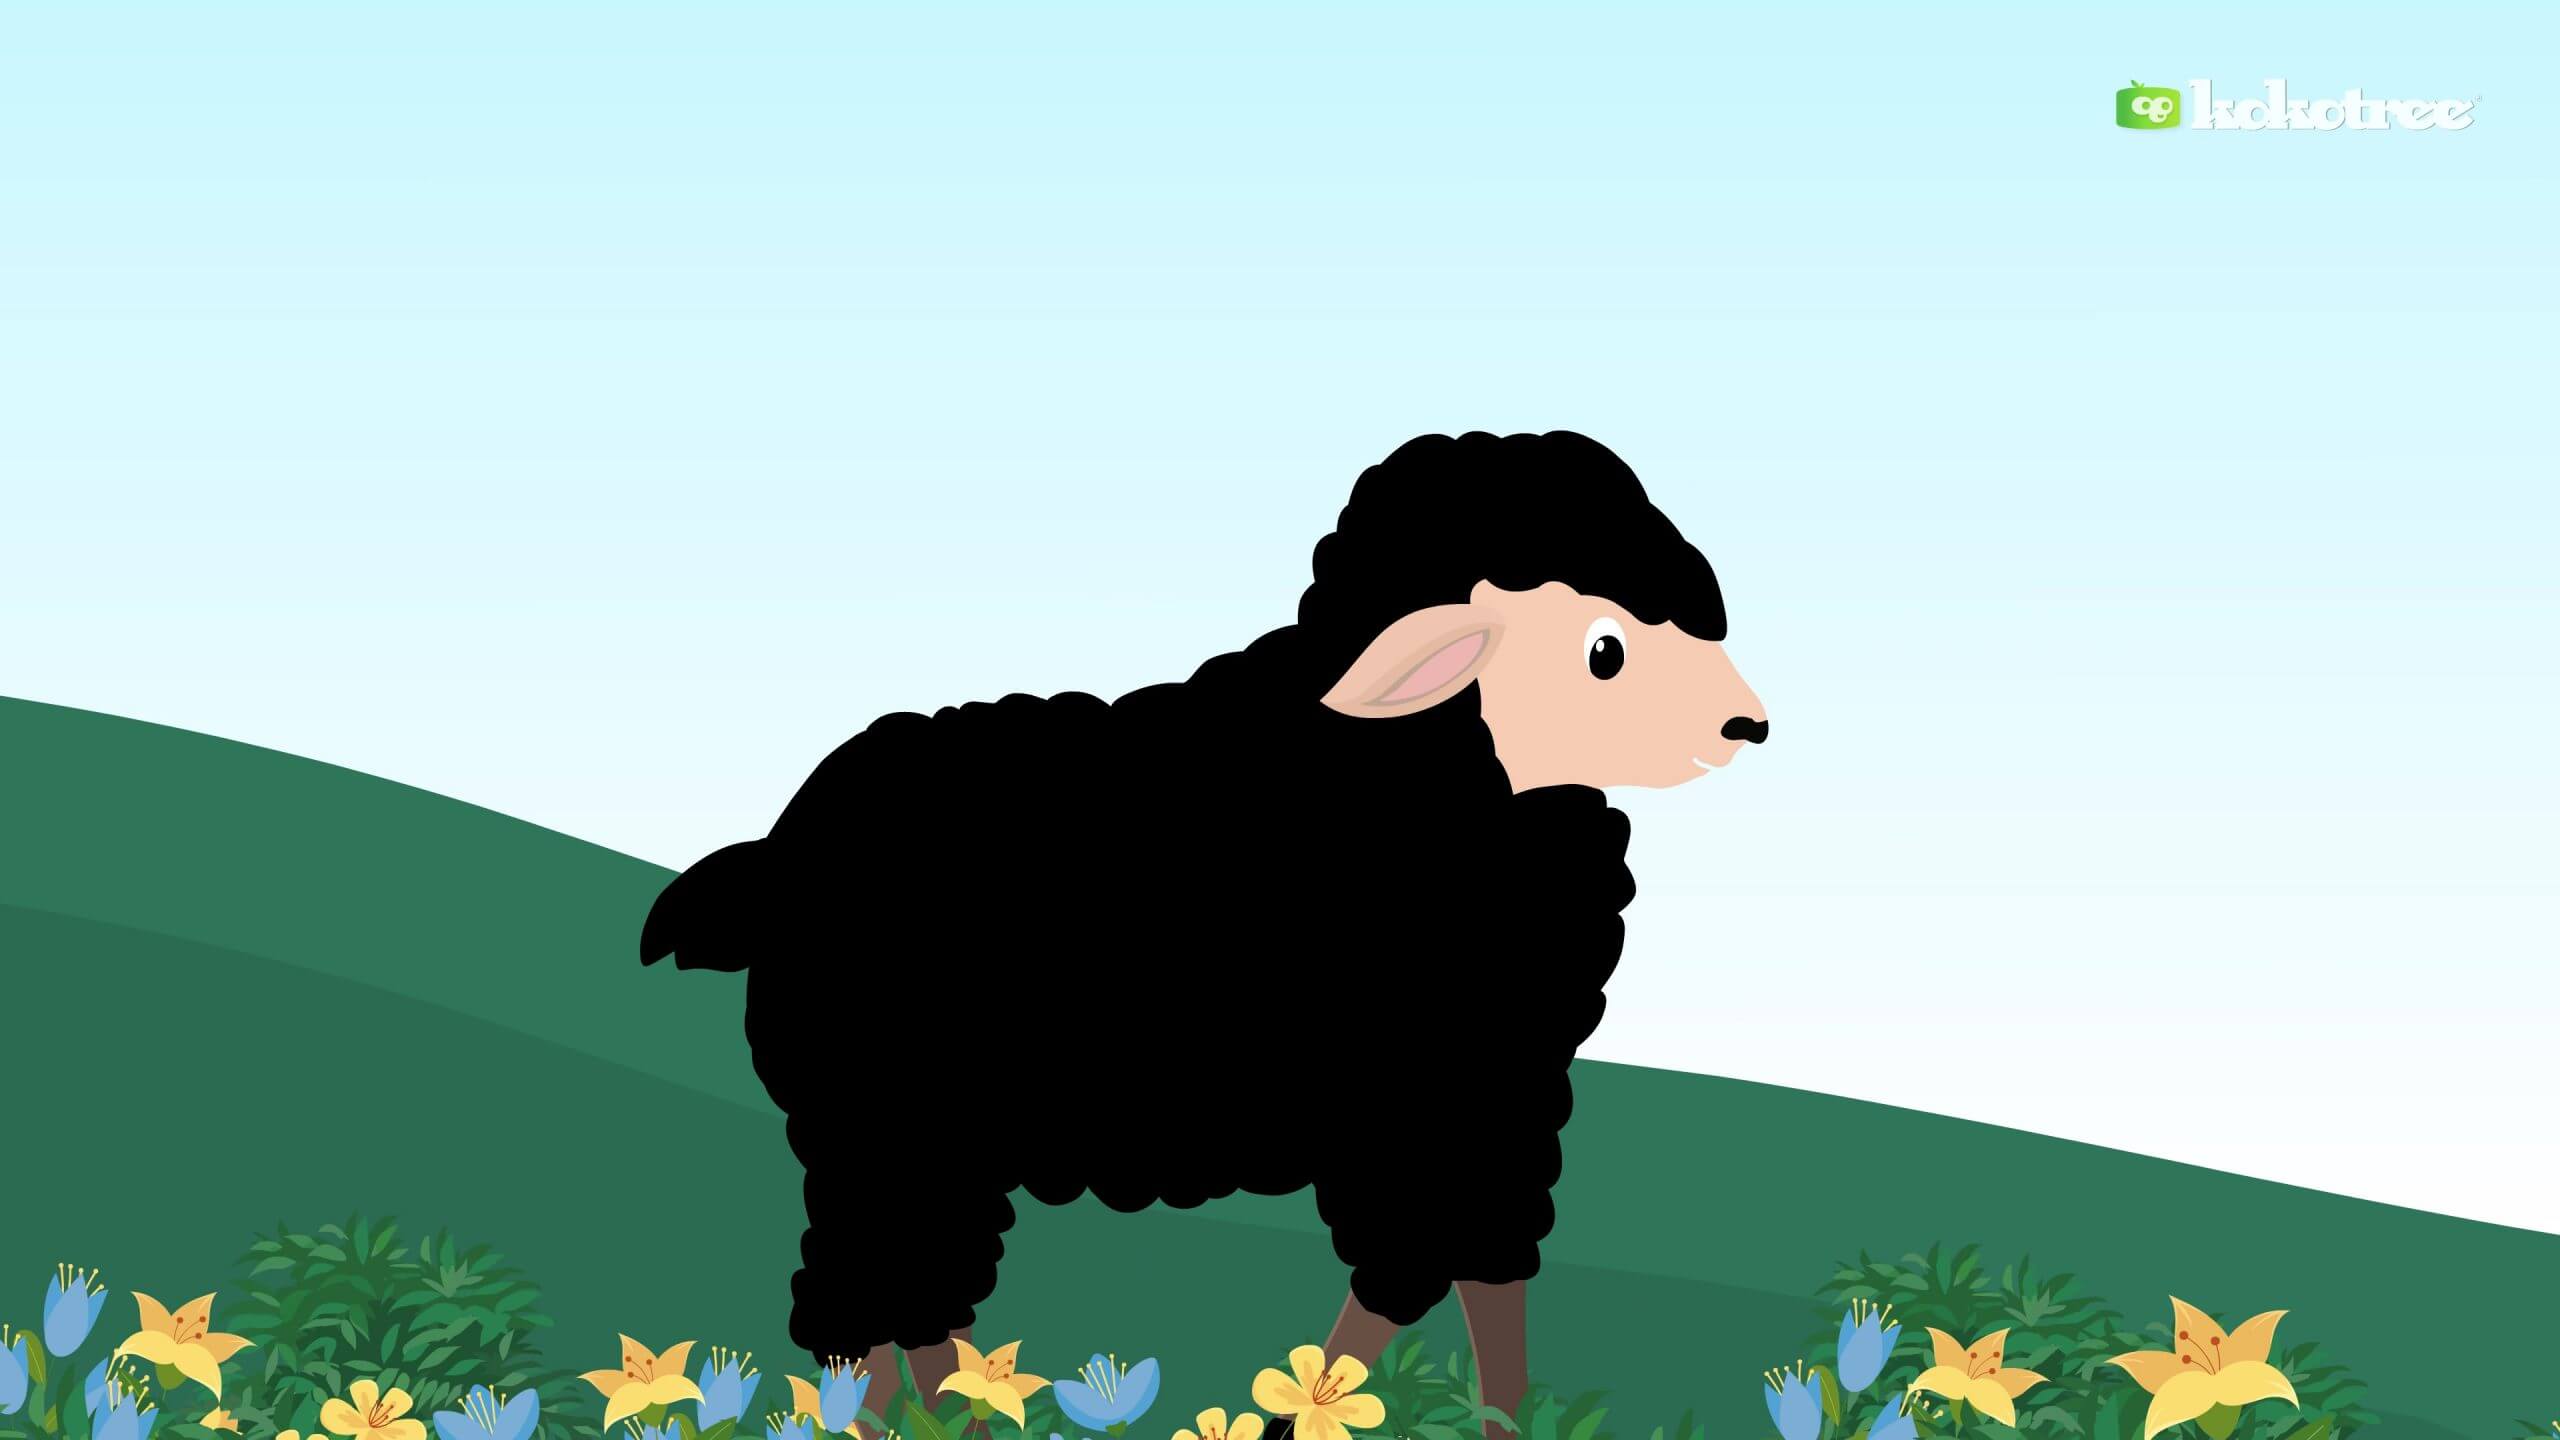 What ages is Baa Baa Black Sheep best for?